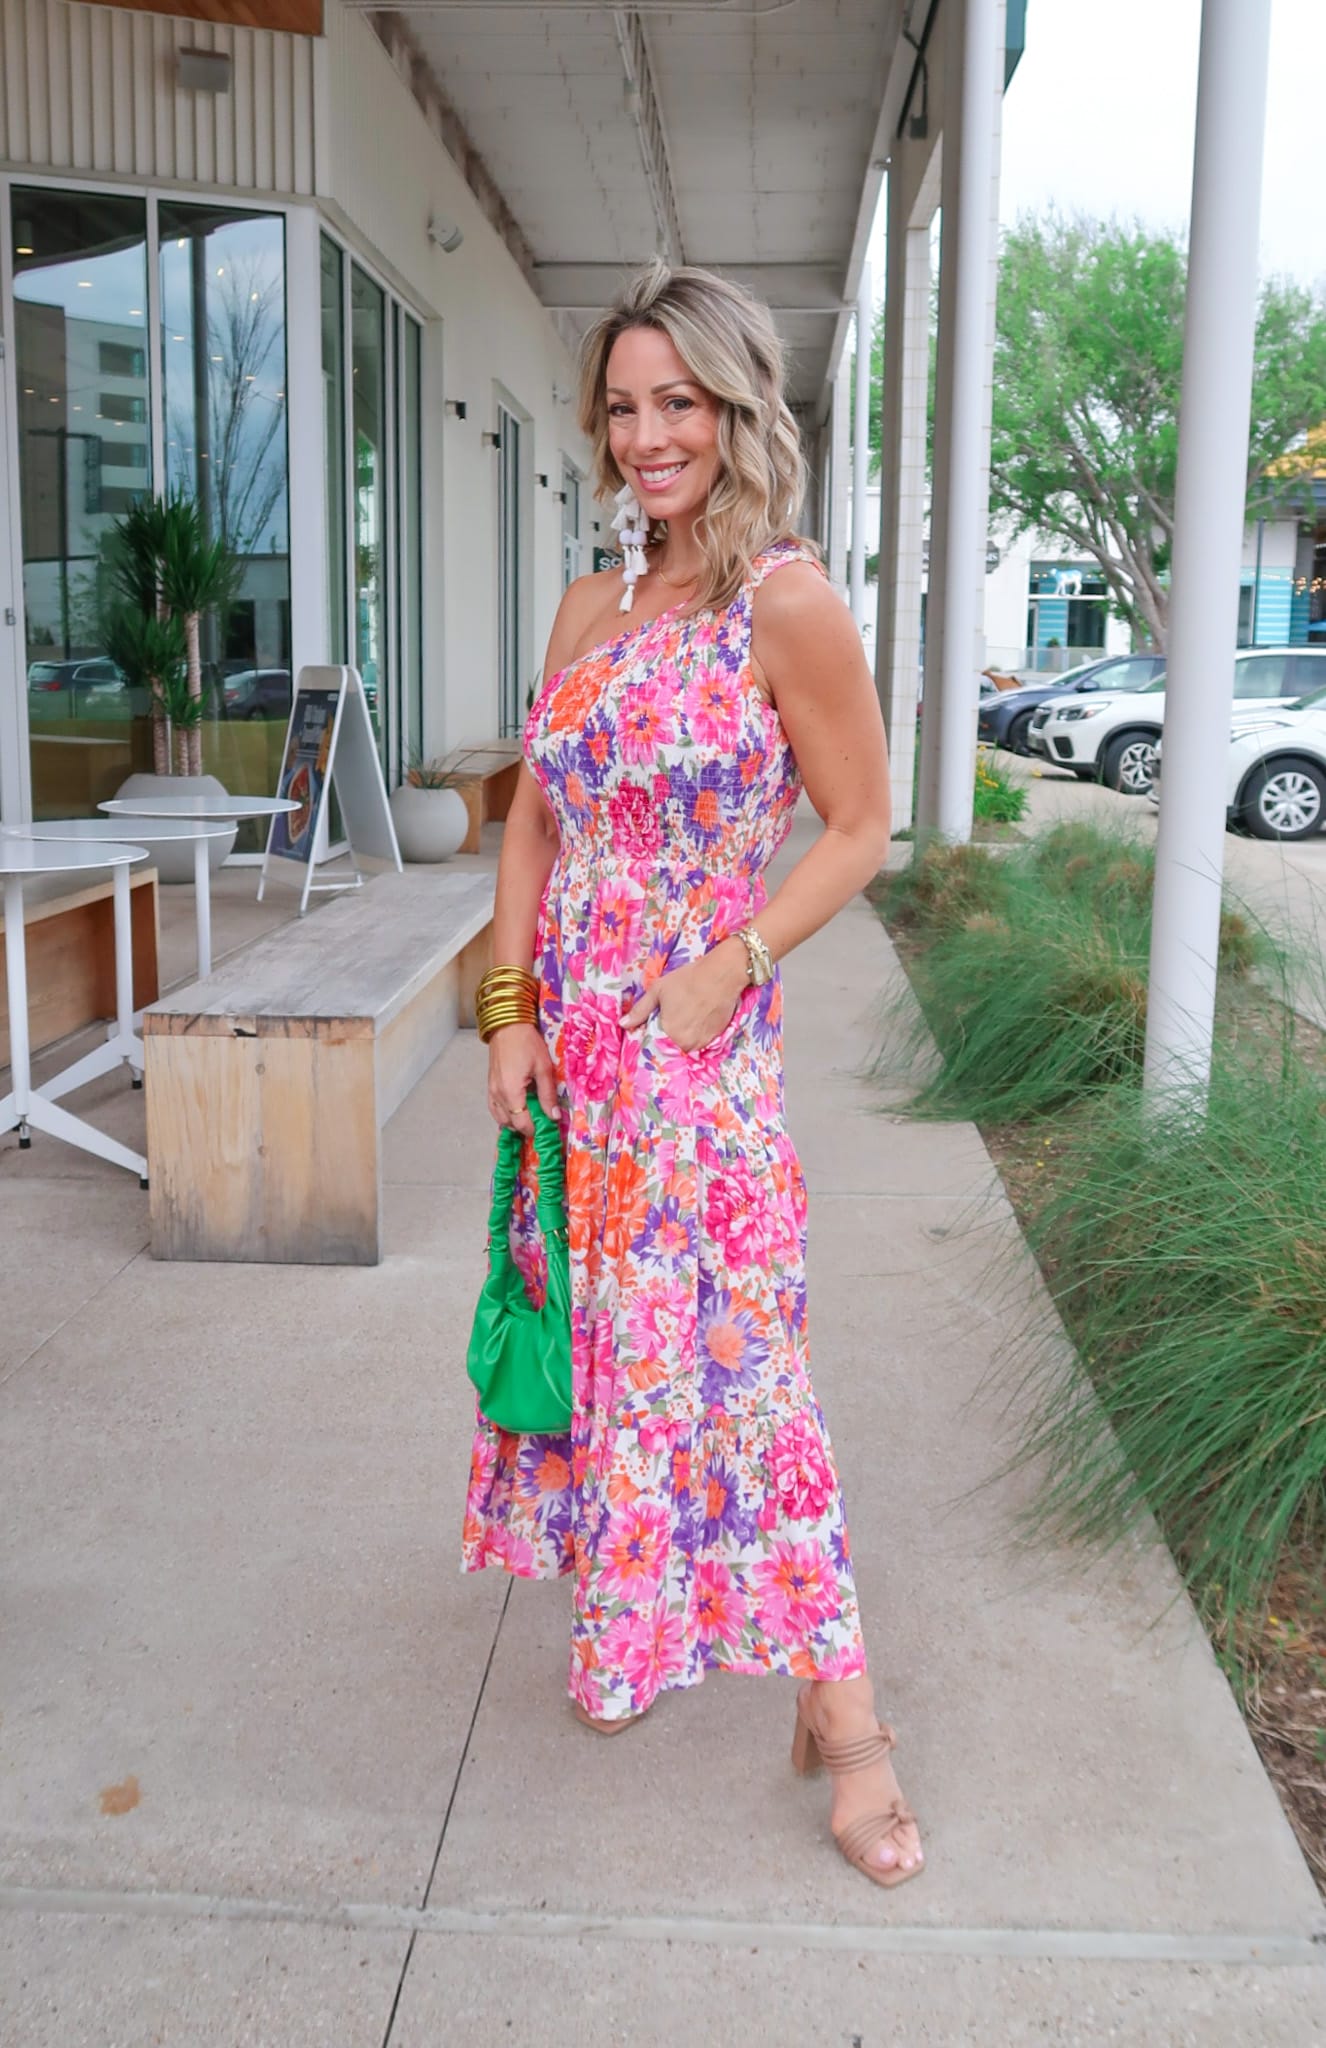 Floral One Shoulder Maxi Dress, Knotted Sandals, Green Purse